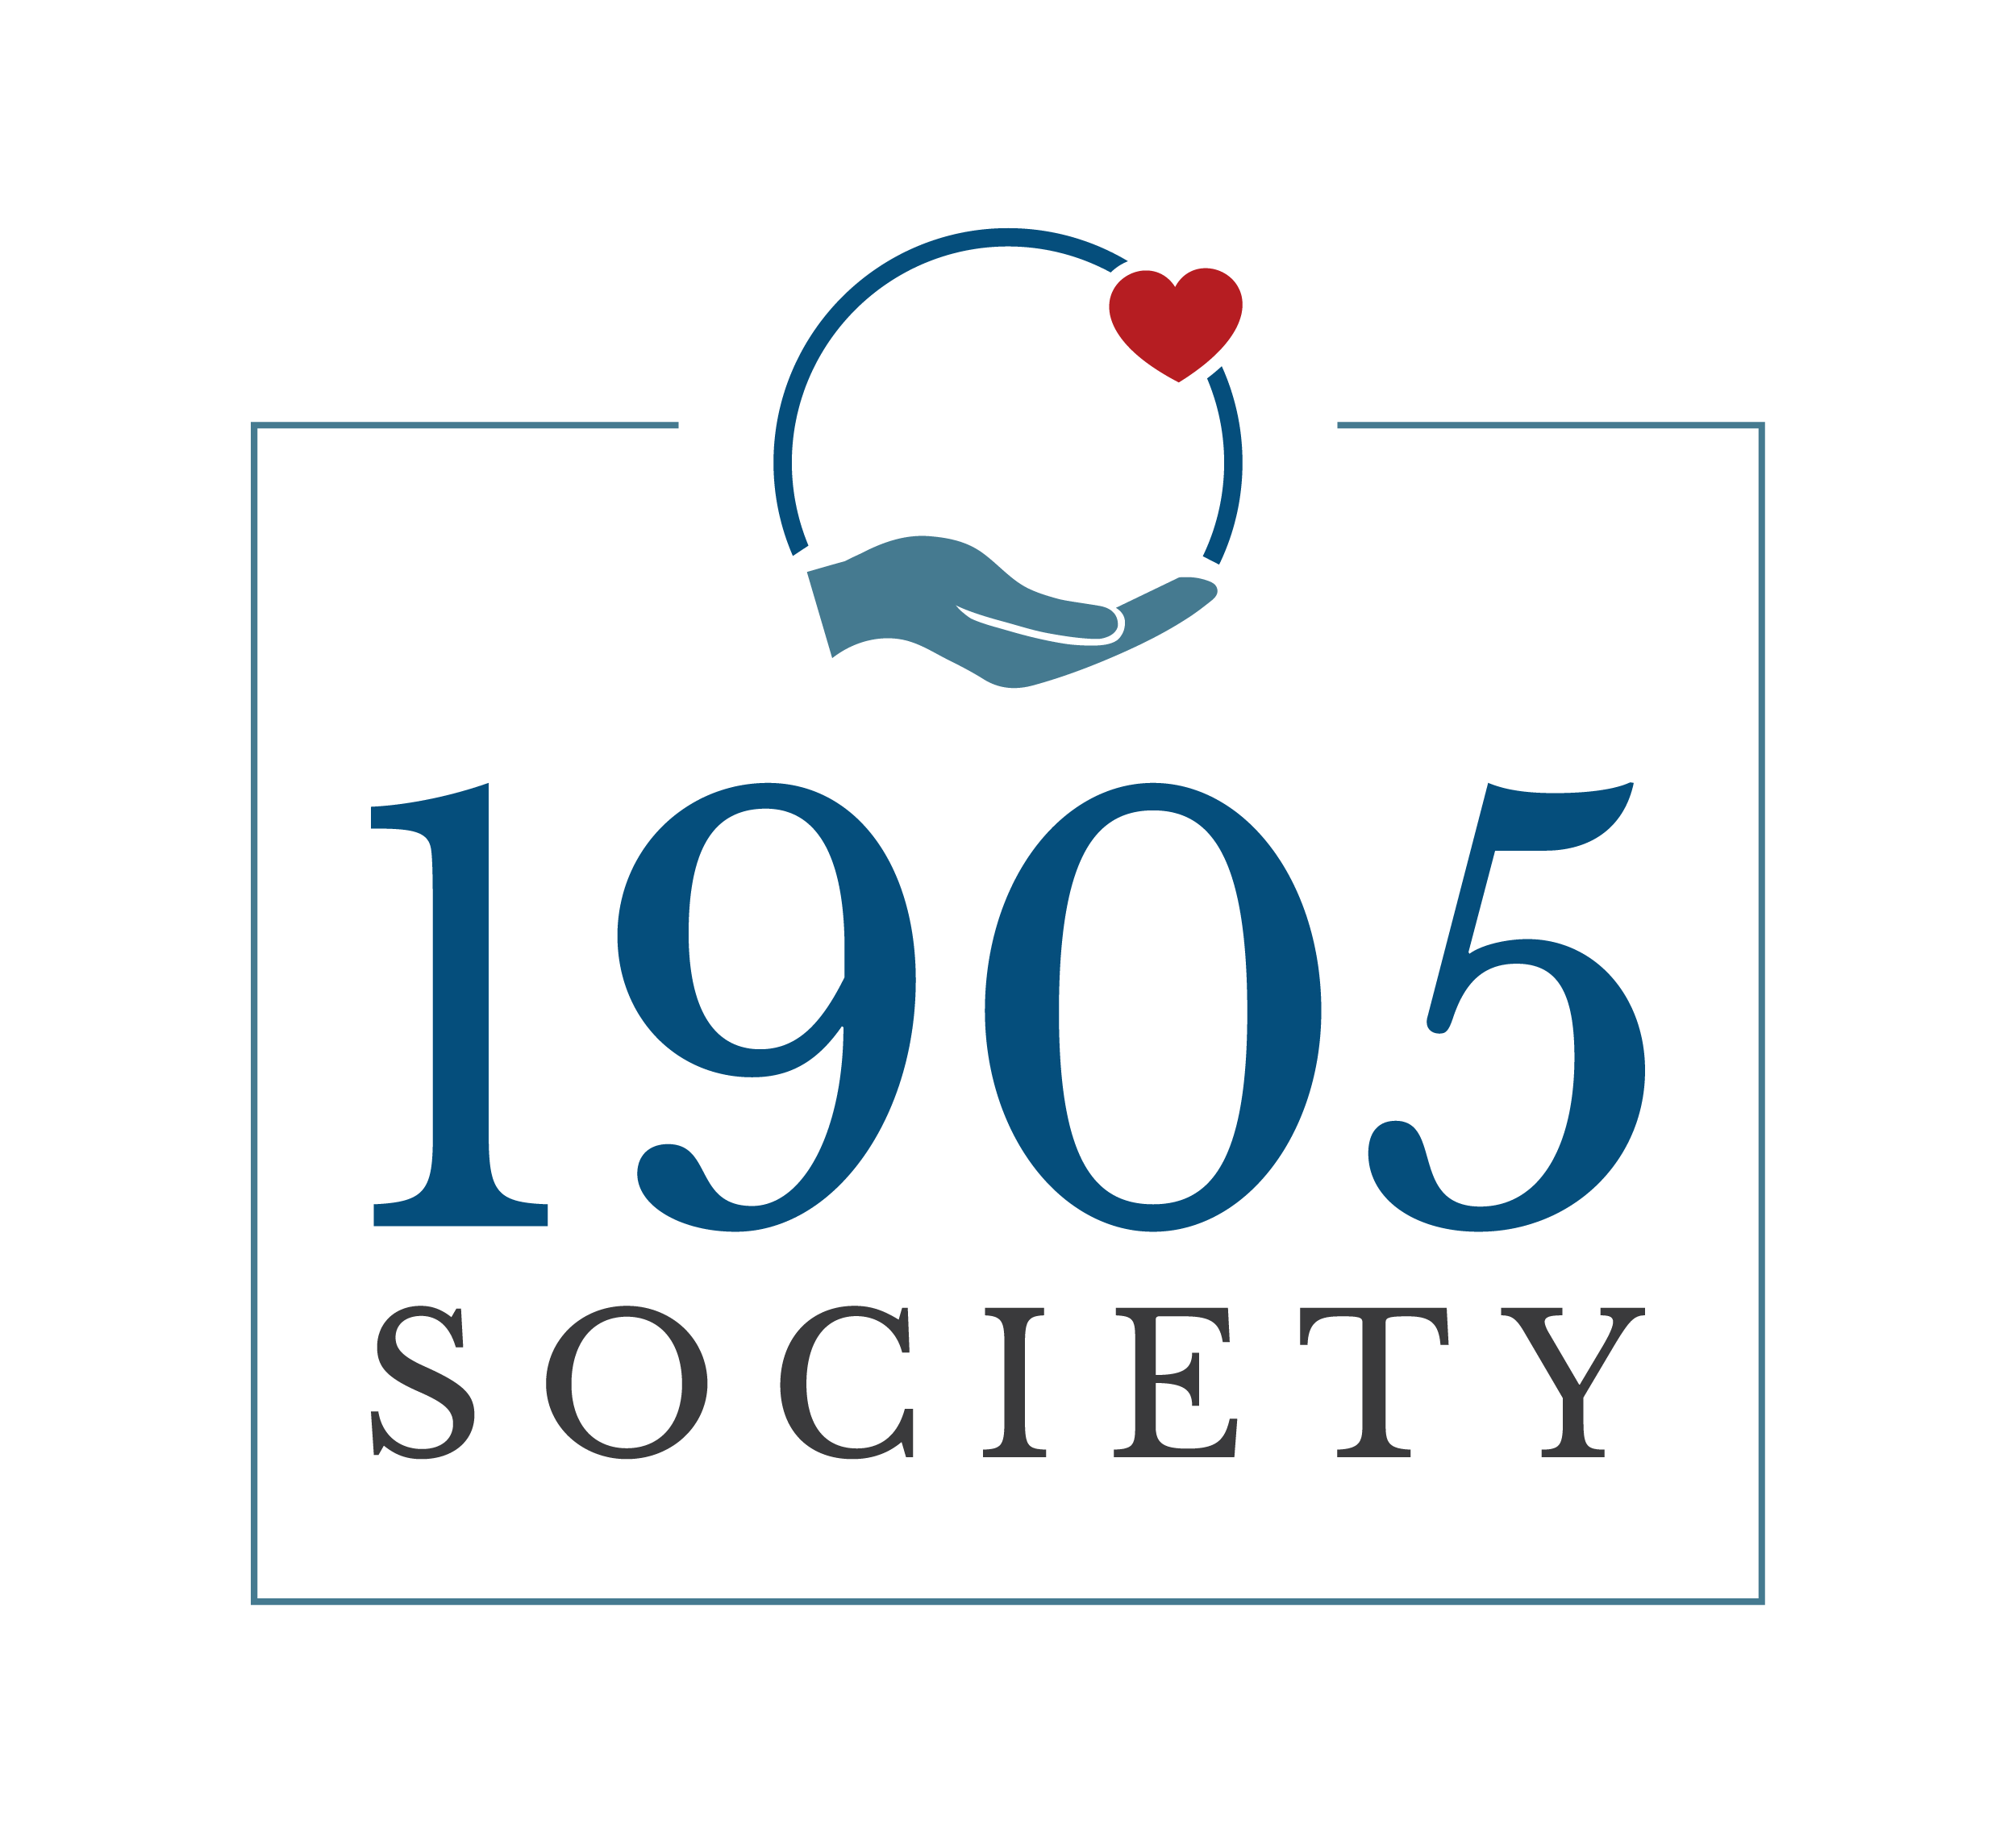 The words 1905 Society with a blue hand holding a circle with a red heart on top